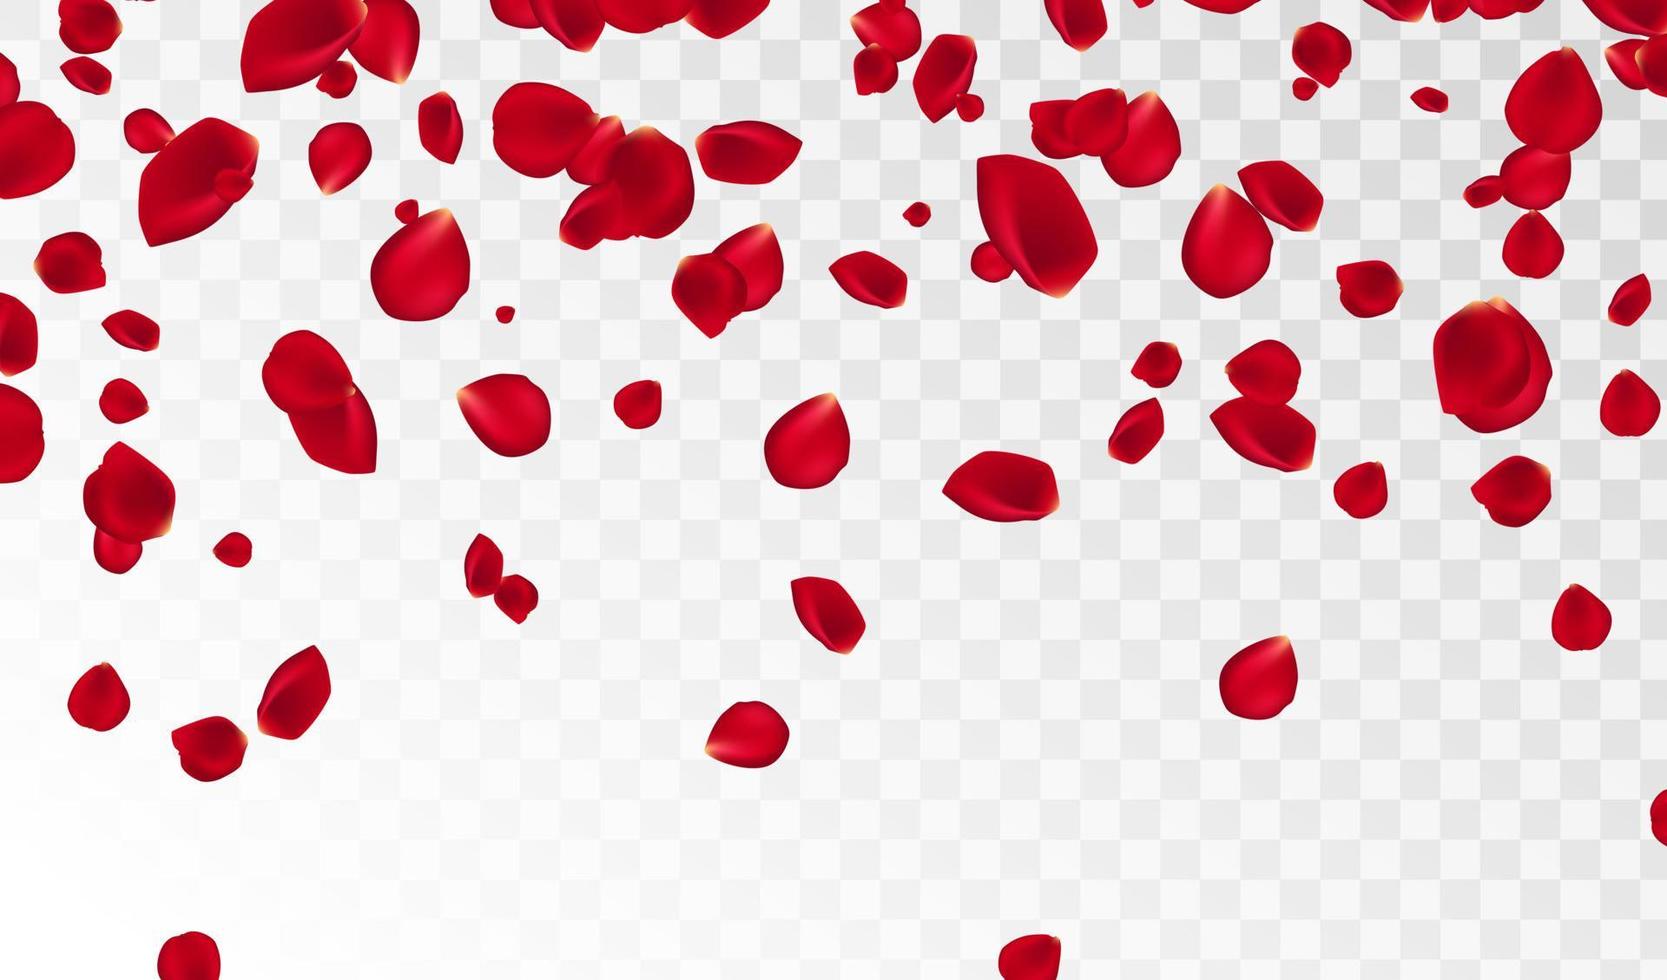 Abstract background with flying red rose petals on a white transparent background. Vector illustration. EPS 10. Rose petals vector illustration